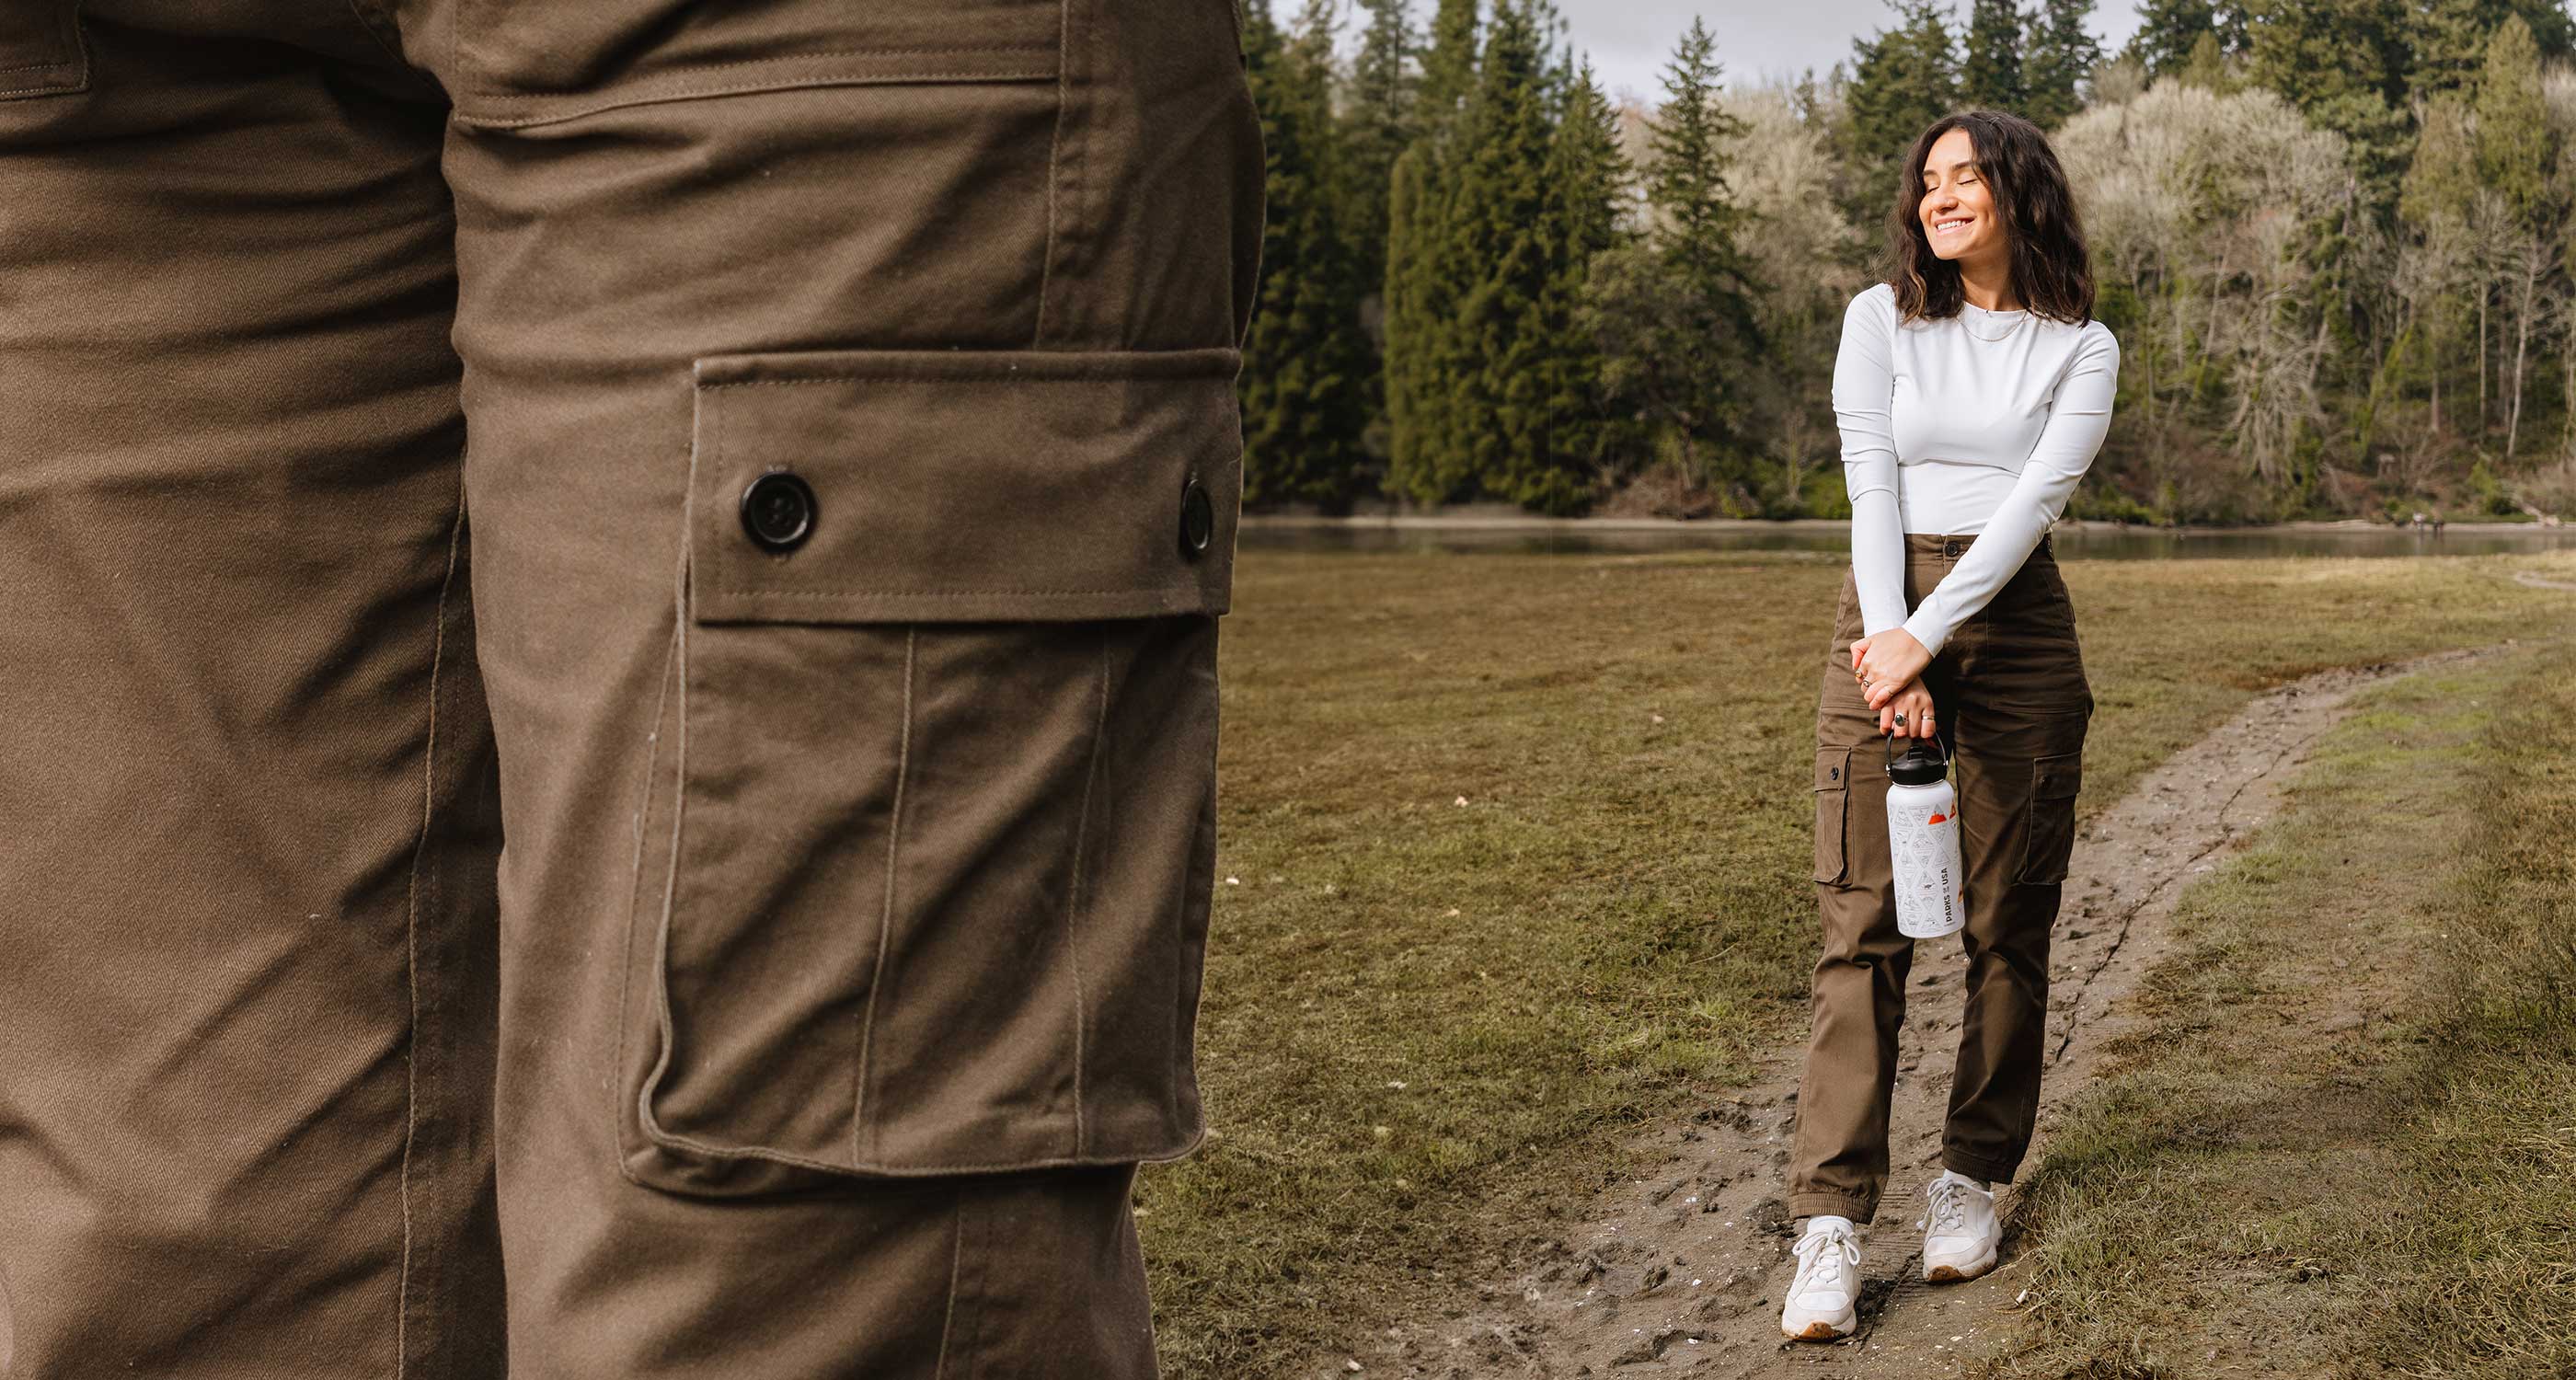 Brown cargo pant pocket on left and woman hiking in brown cargo pants and white travel water bottle